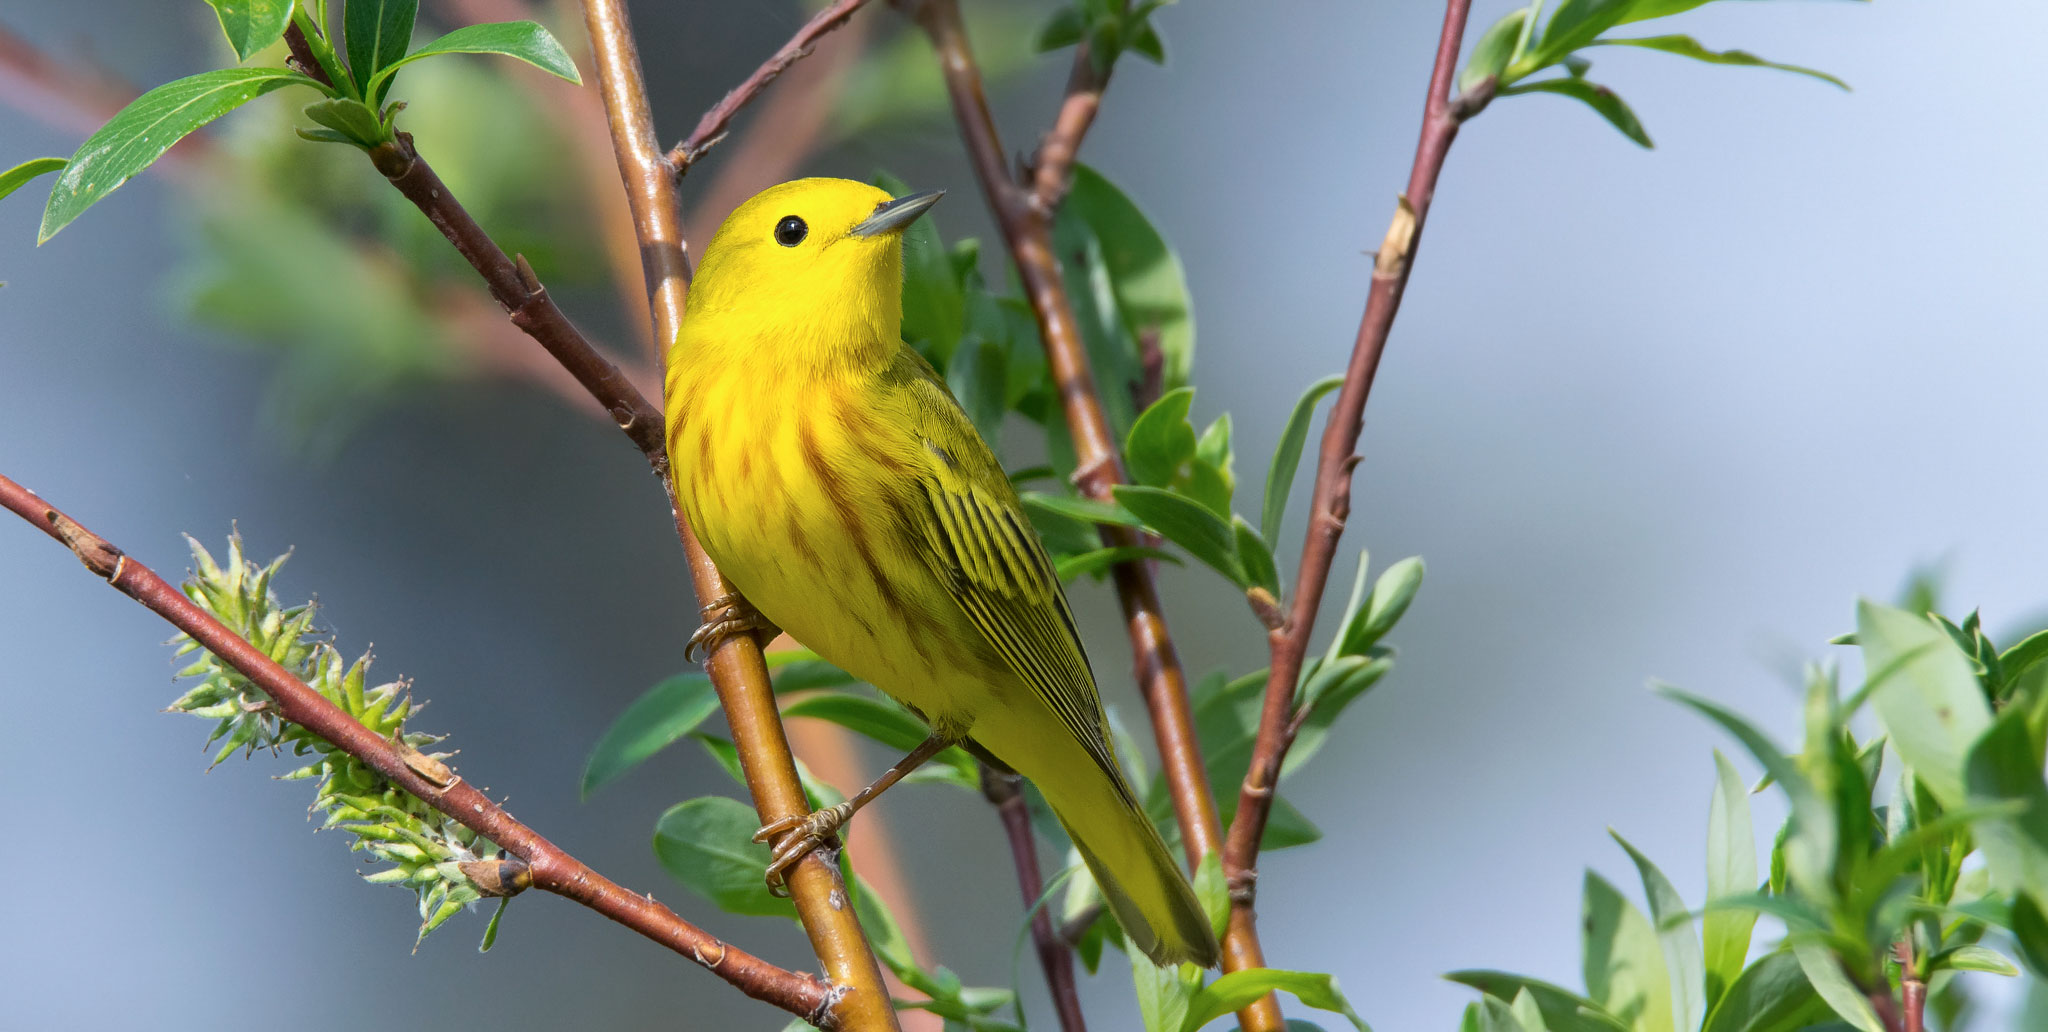 21 yellow warbler native willow tree keith williams flickr cc%28by nc%202.0%29%20%281%29